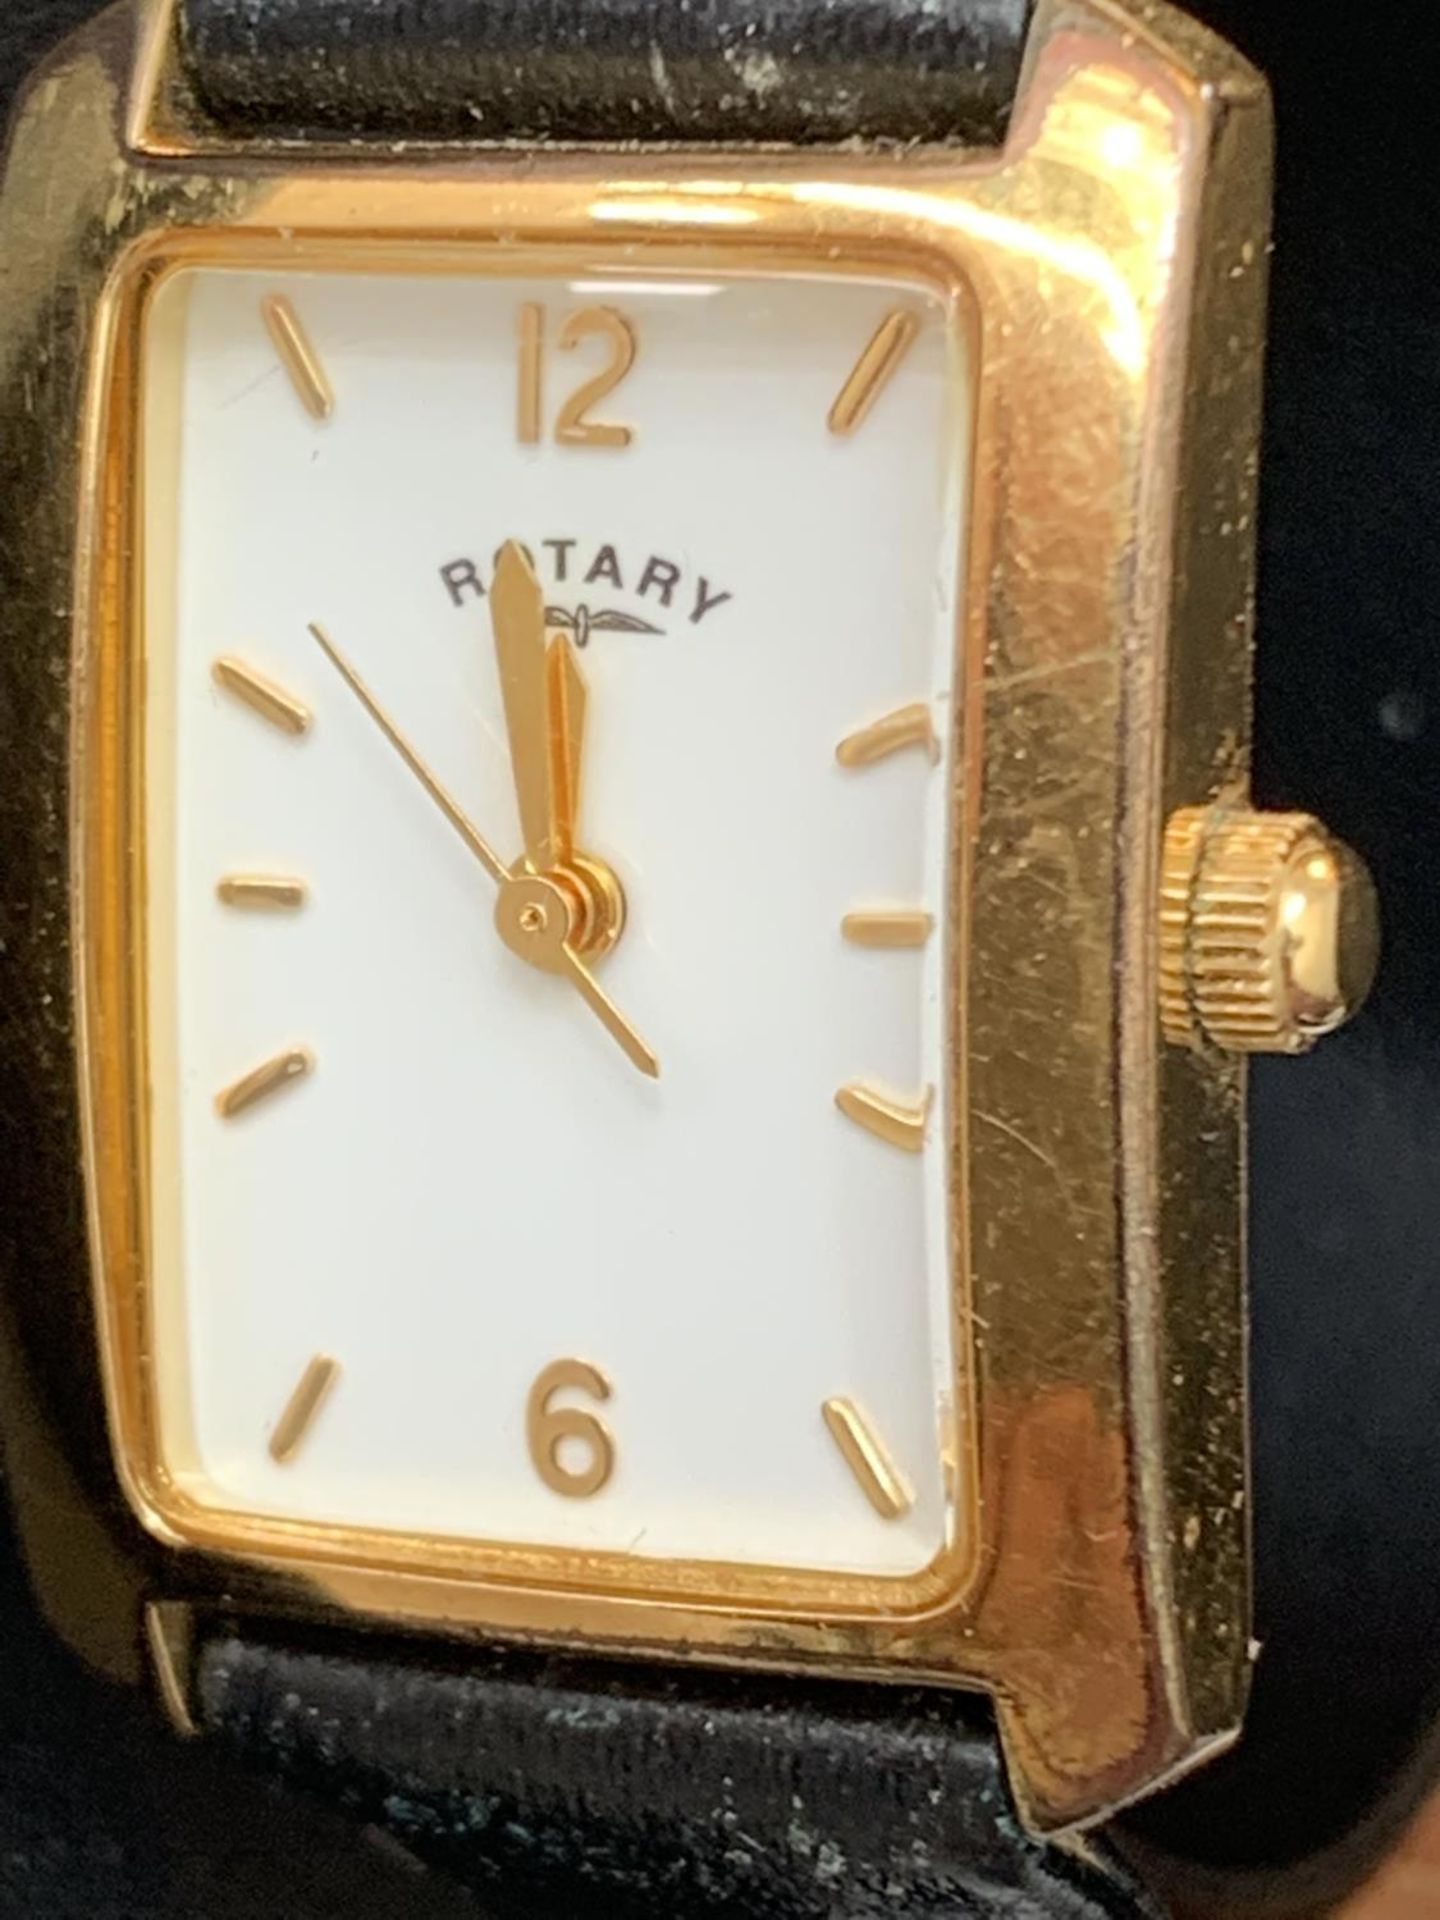 A LADIES ROTARY WRISTWATCH SEEN WORKING BUT NO WARRANTY IN A PRESENTATION BOX - Image 2 of 4